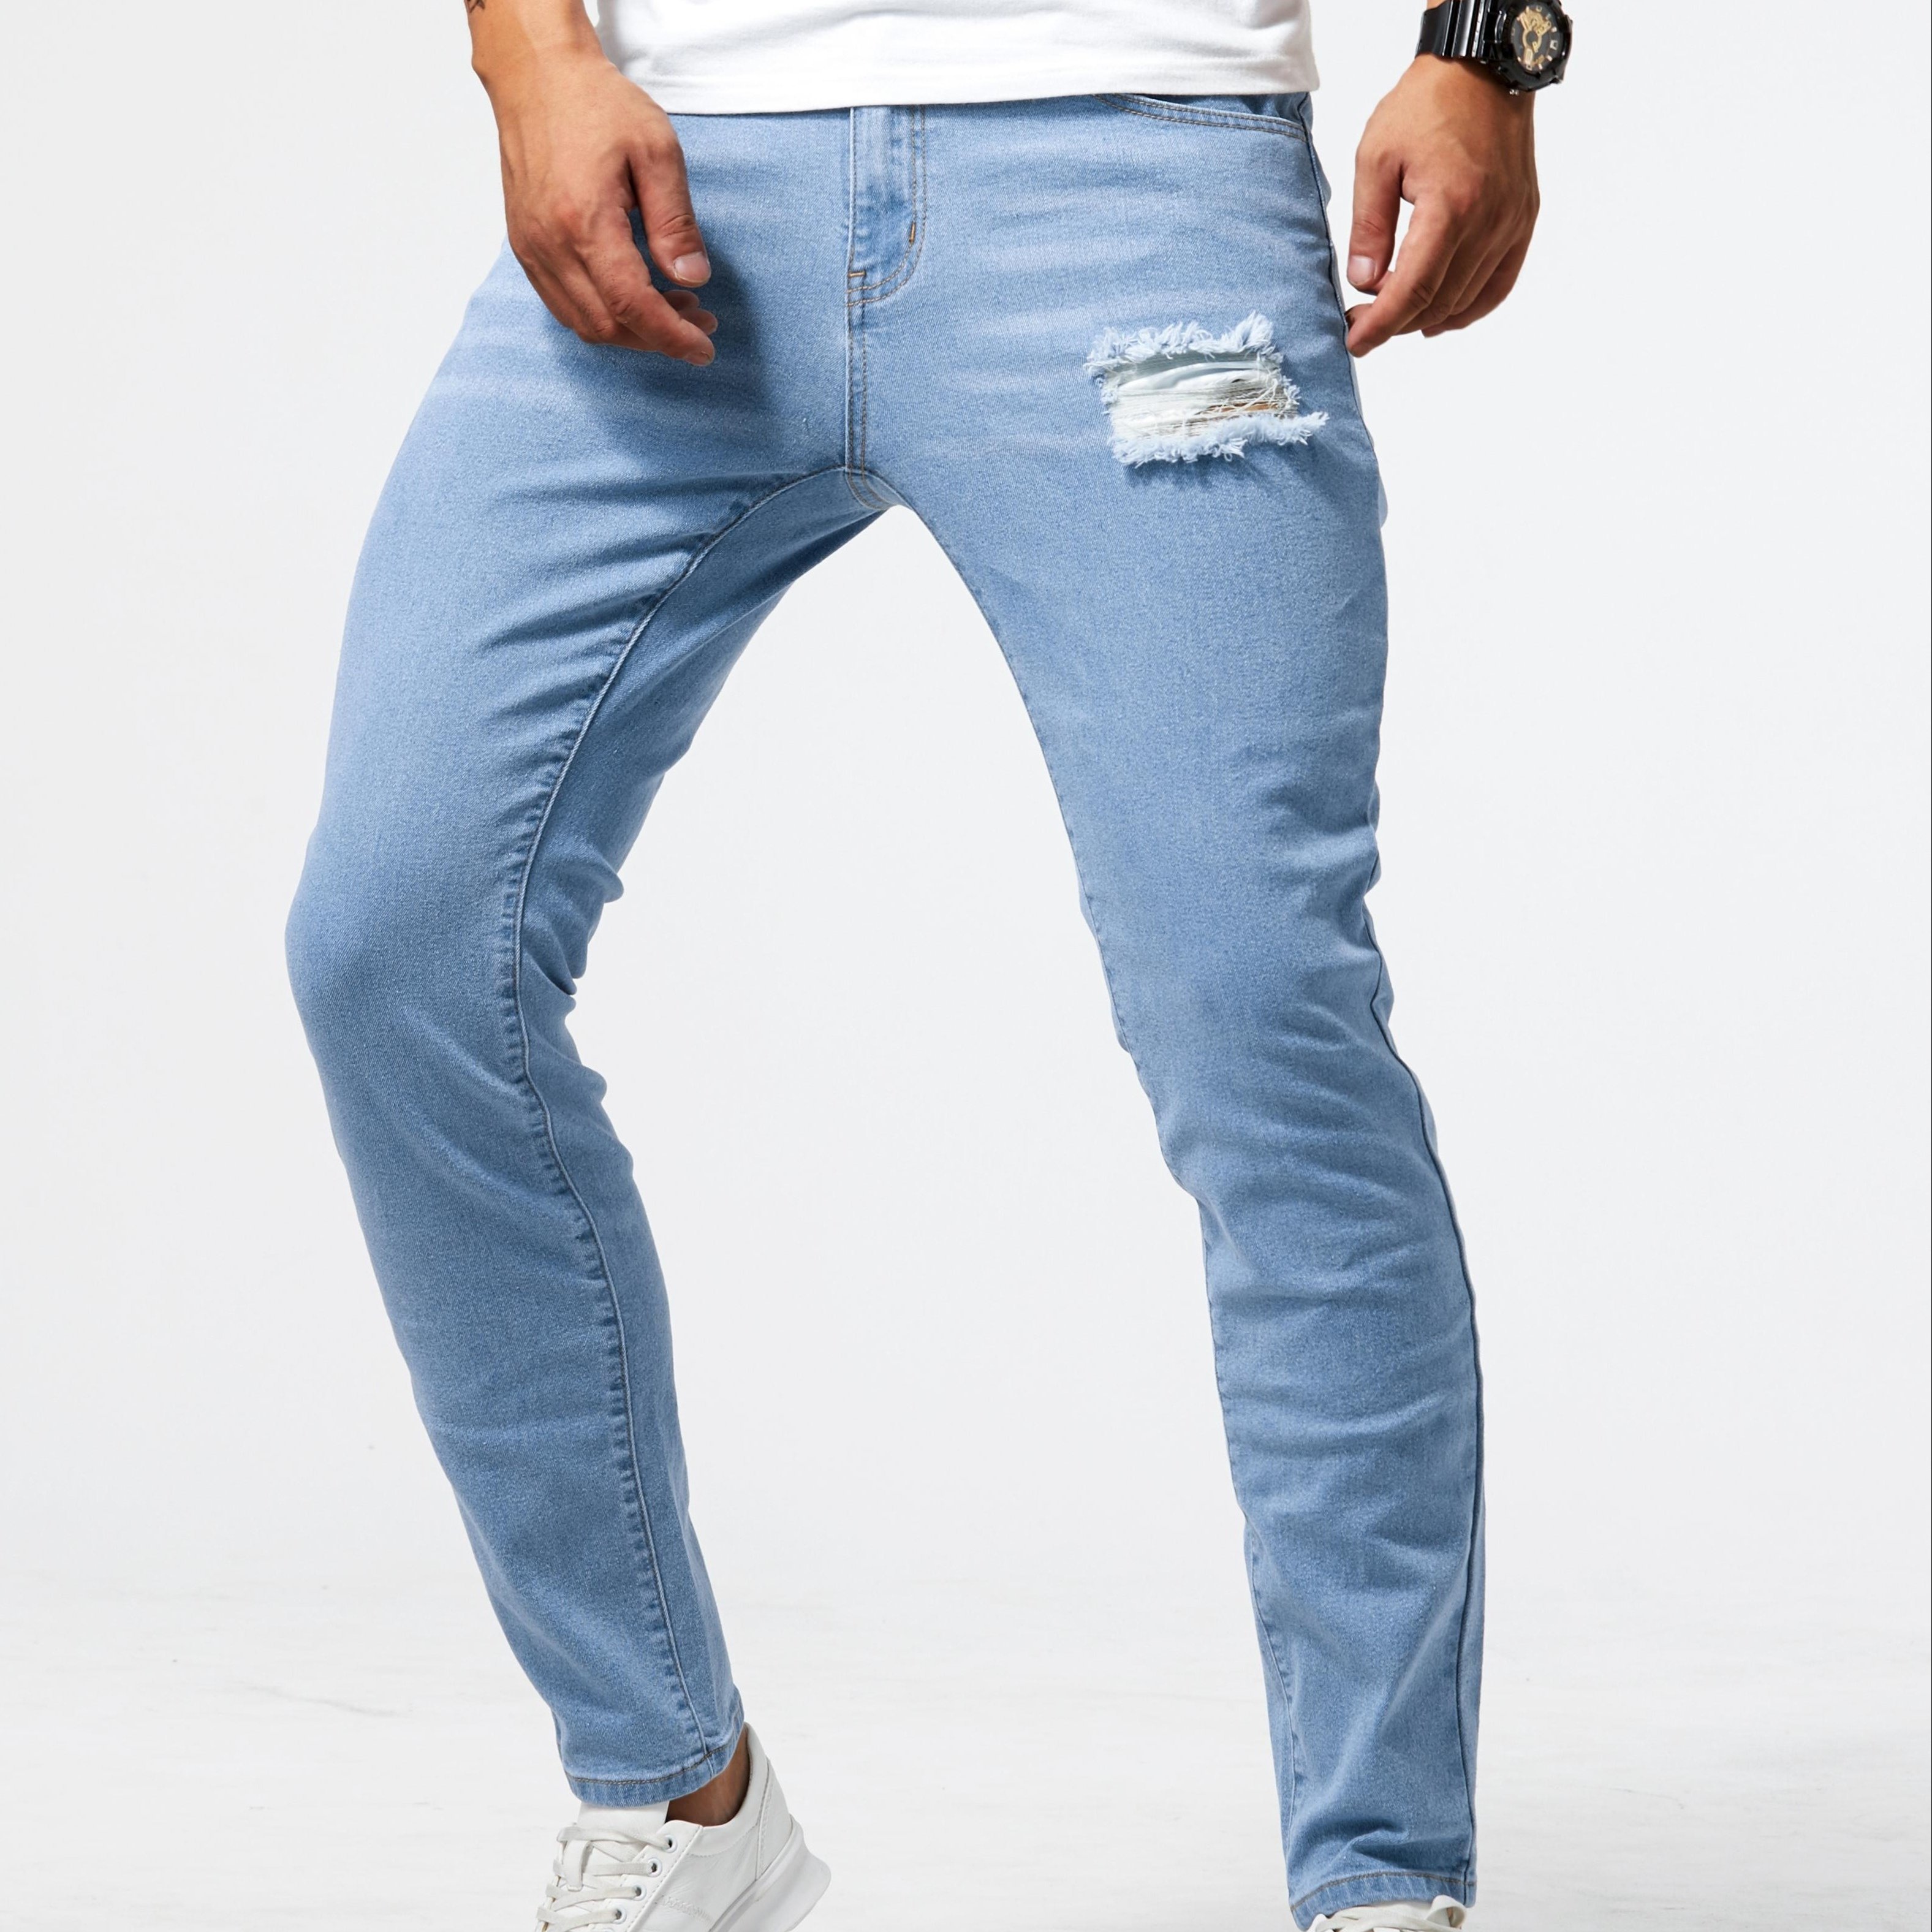 Men's Jeans, Stretch, Slim, Ripped, Dress & More Styles